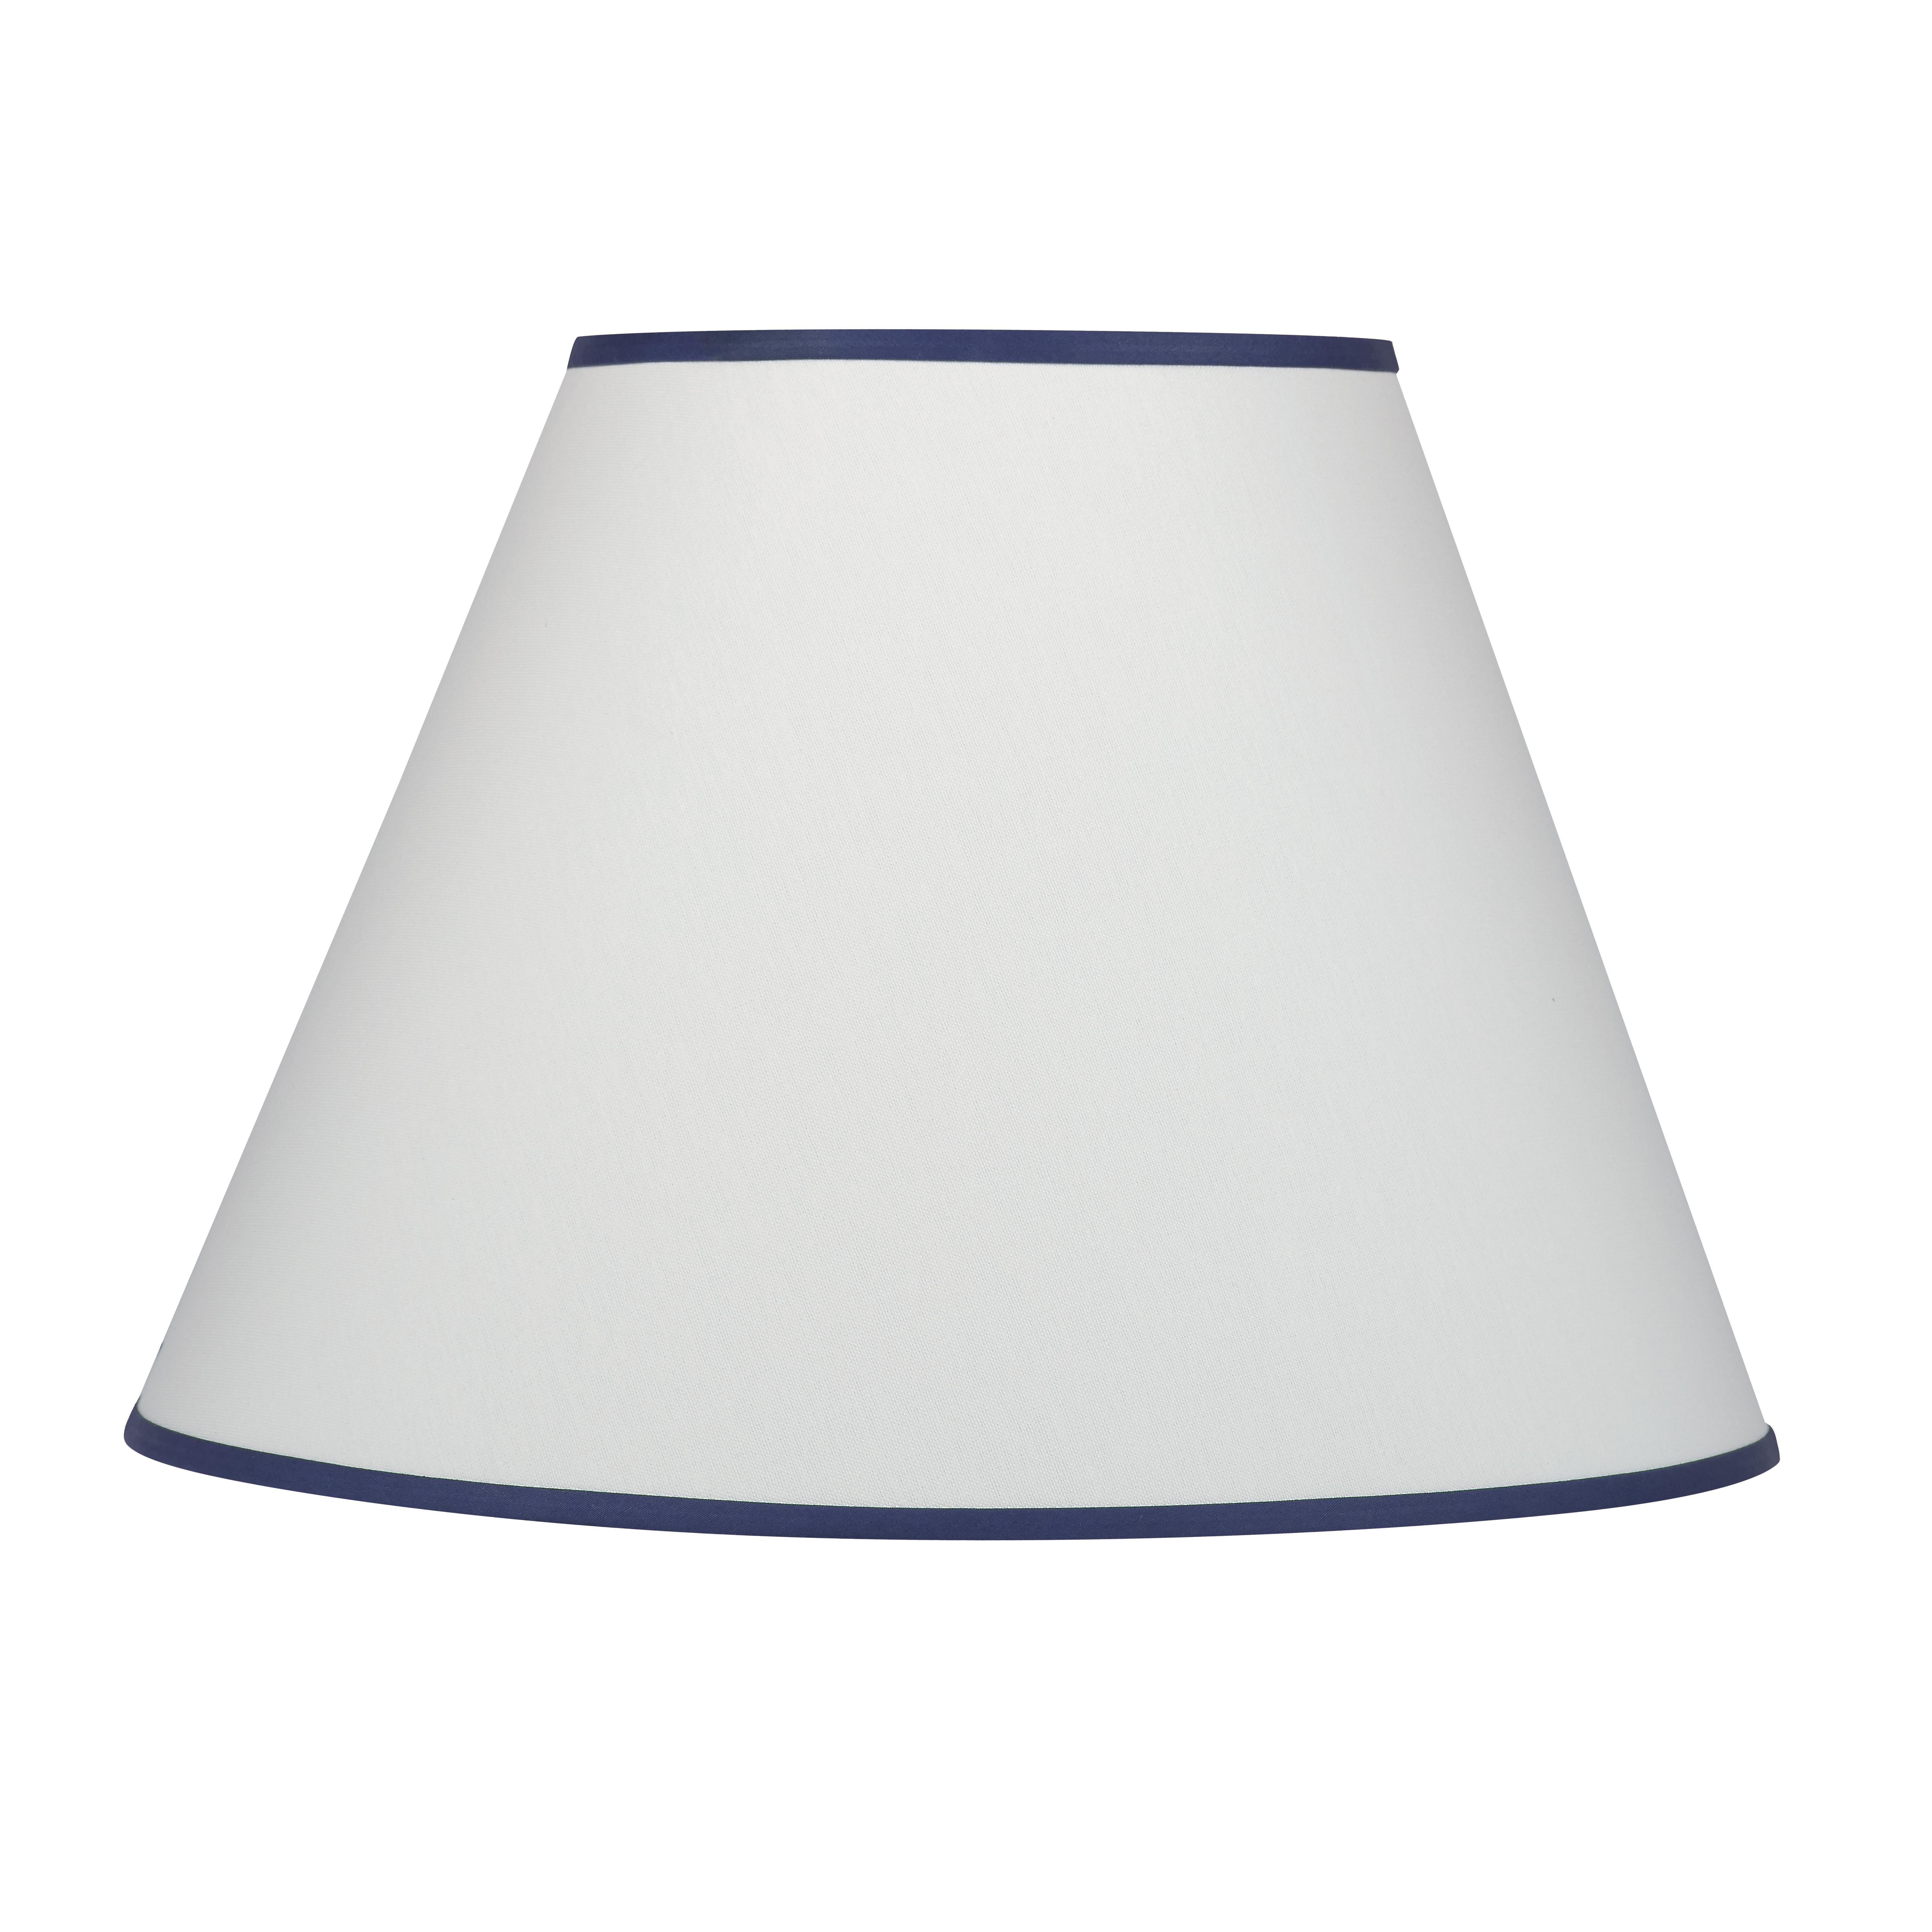 A cream colored hard-backed fabric empire shade with navy trim – an easy way to bring together similar colored elements in the room. Scaled to work on nearly all of the Bunny Williams Home table lamps.
